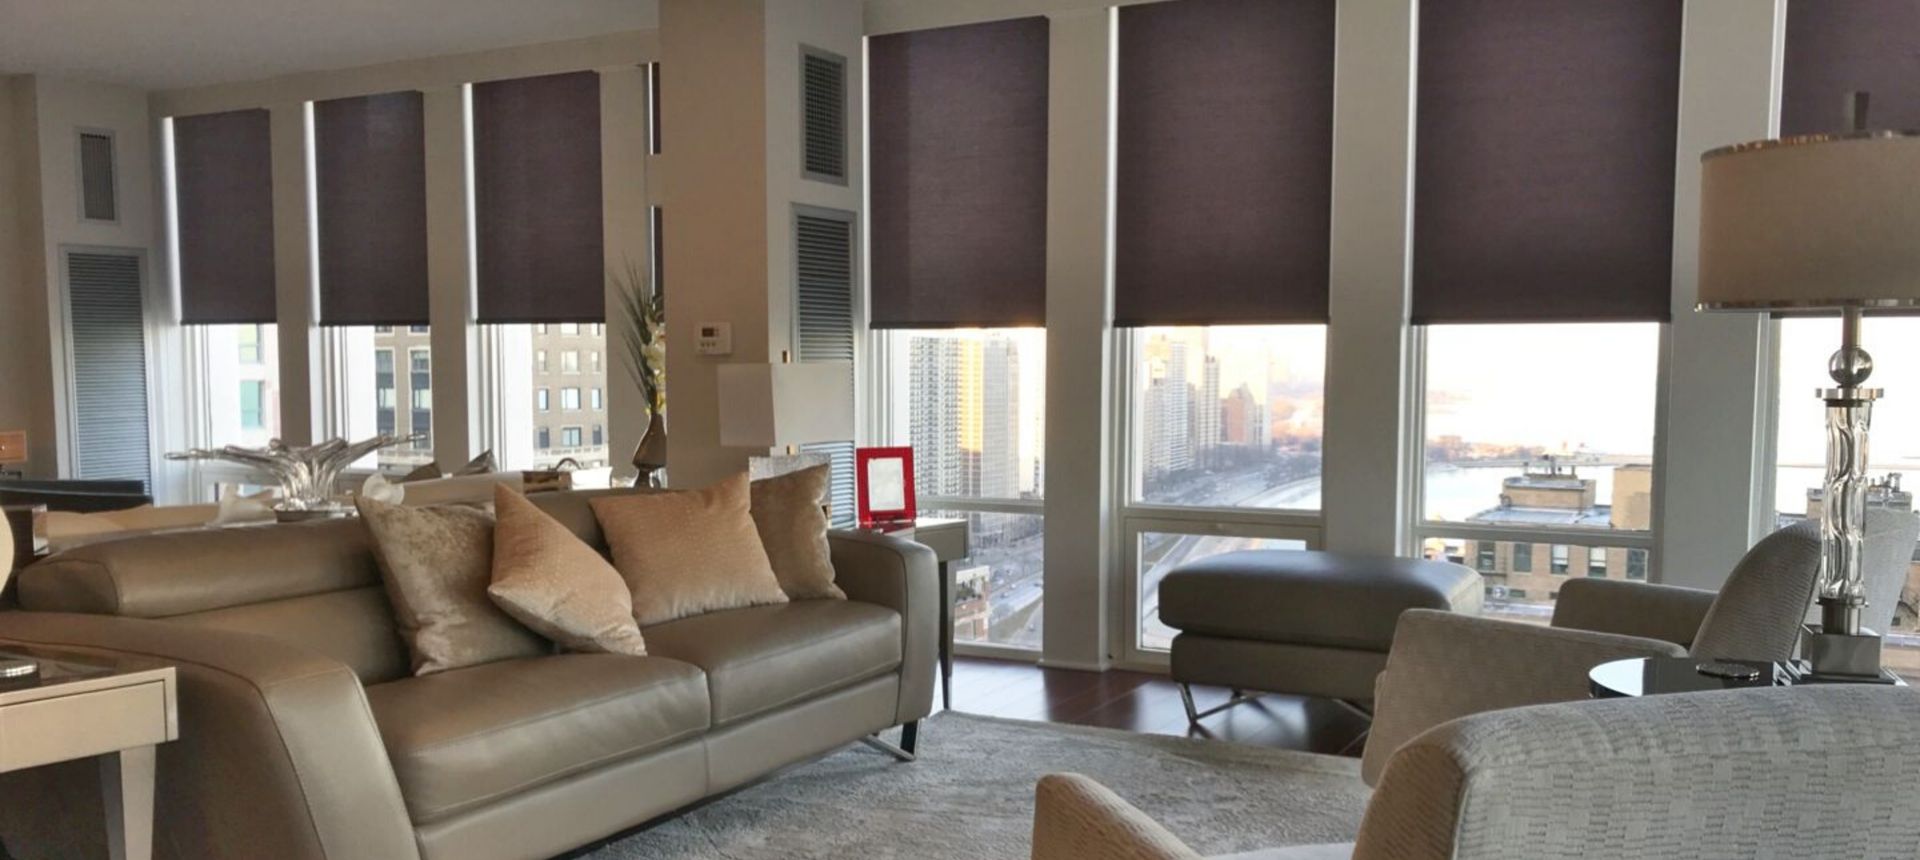 roller-shades-chicago-living-room-tusk-umber-918-beige-couch